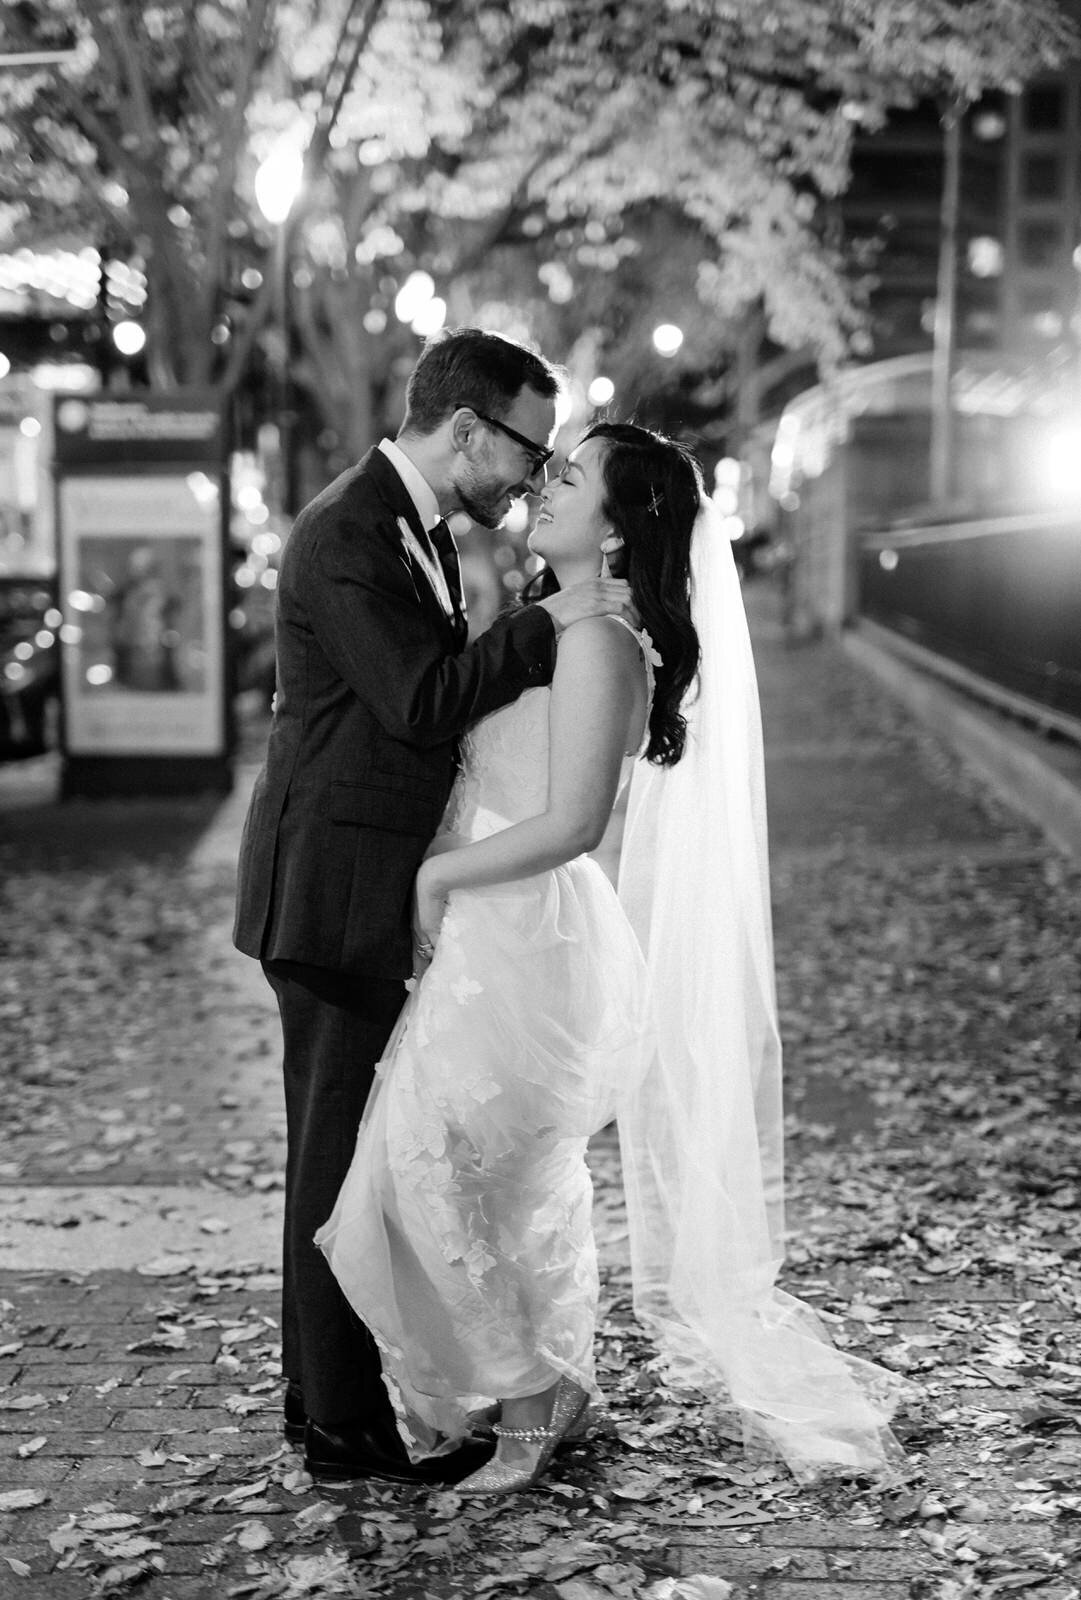 Creative Wedding Photography at The Riggs Hotel in Washington DC 27